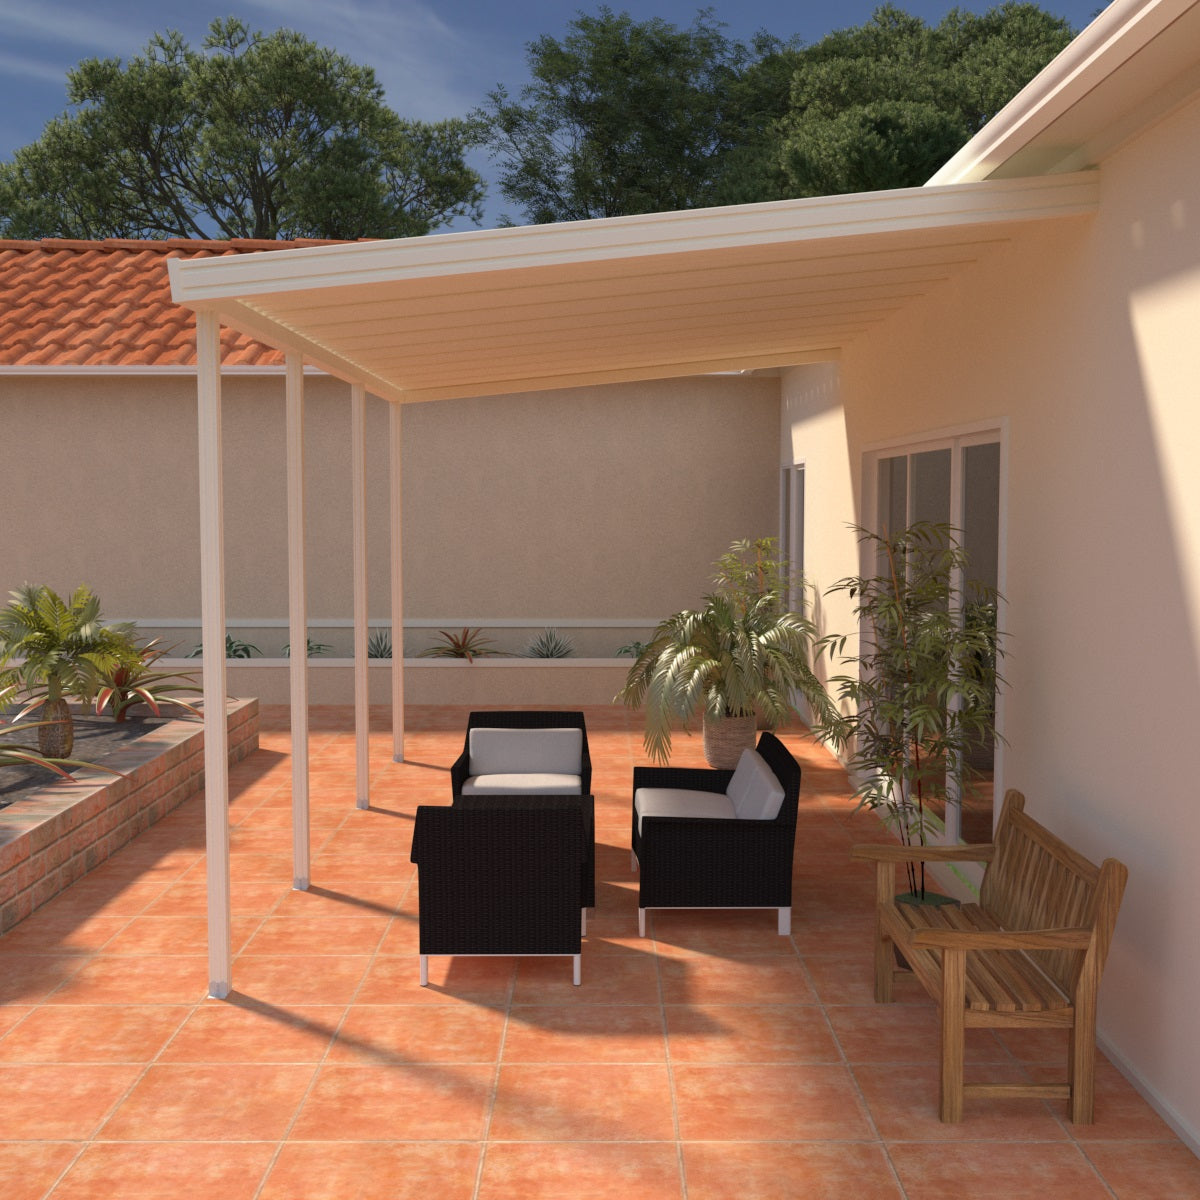 10 ft. Deep x 20 ft. Wide Ivory Attached Aluminum Patio Cover -4 Posts - (20lb Low/Medium Snow Area)